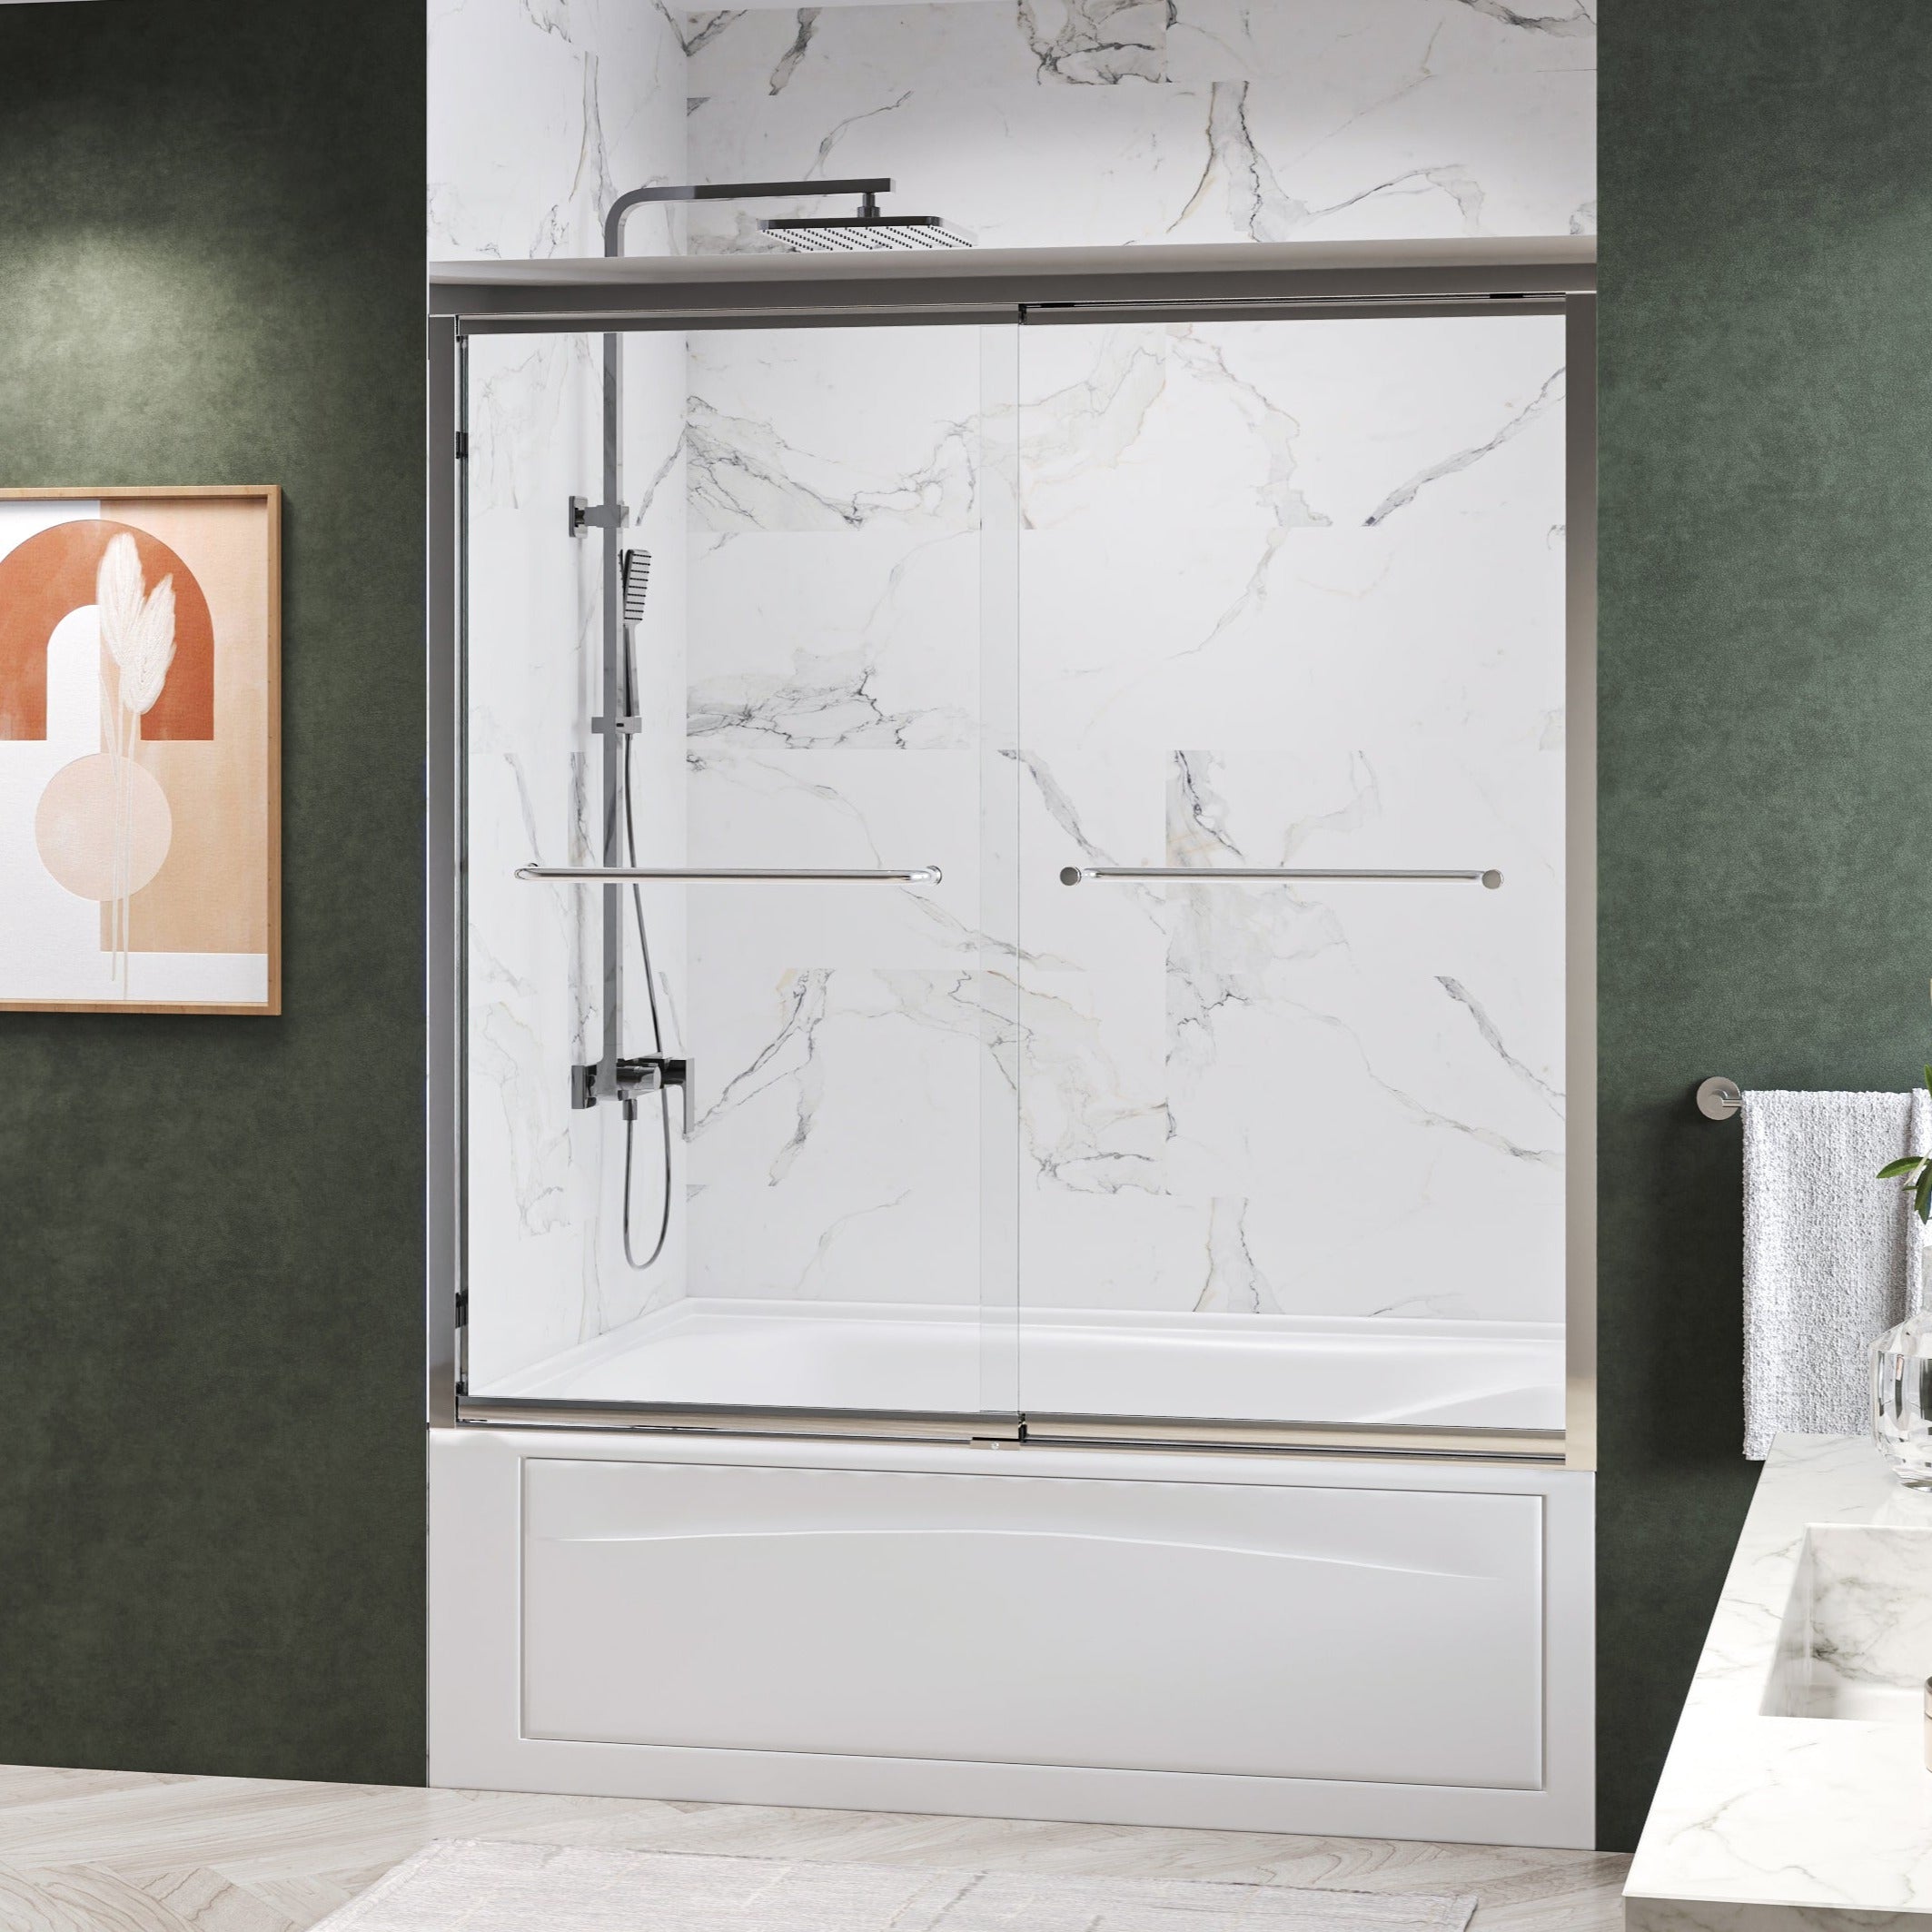 Fusion Framed Double Sliding Shower Door with 5/16" Clear Tempered Glass